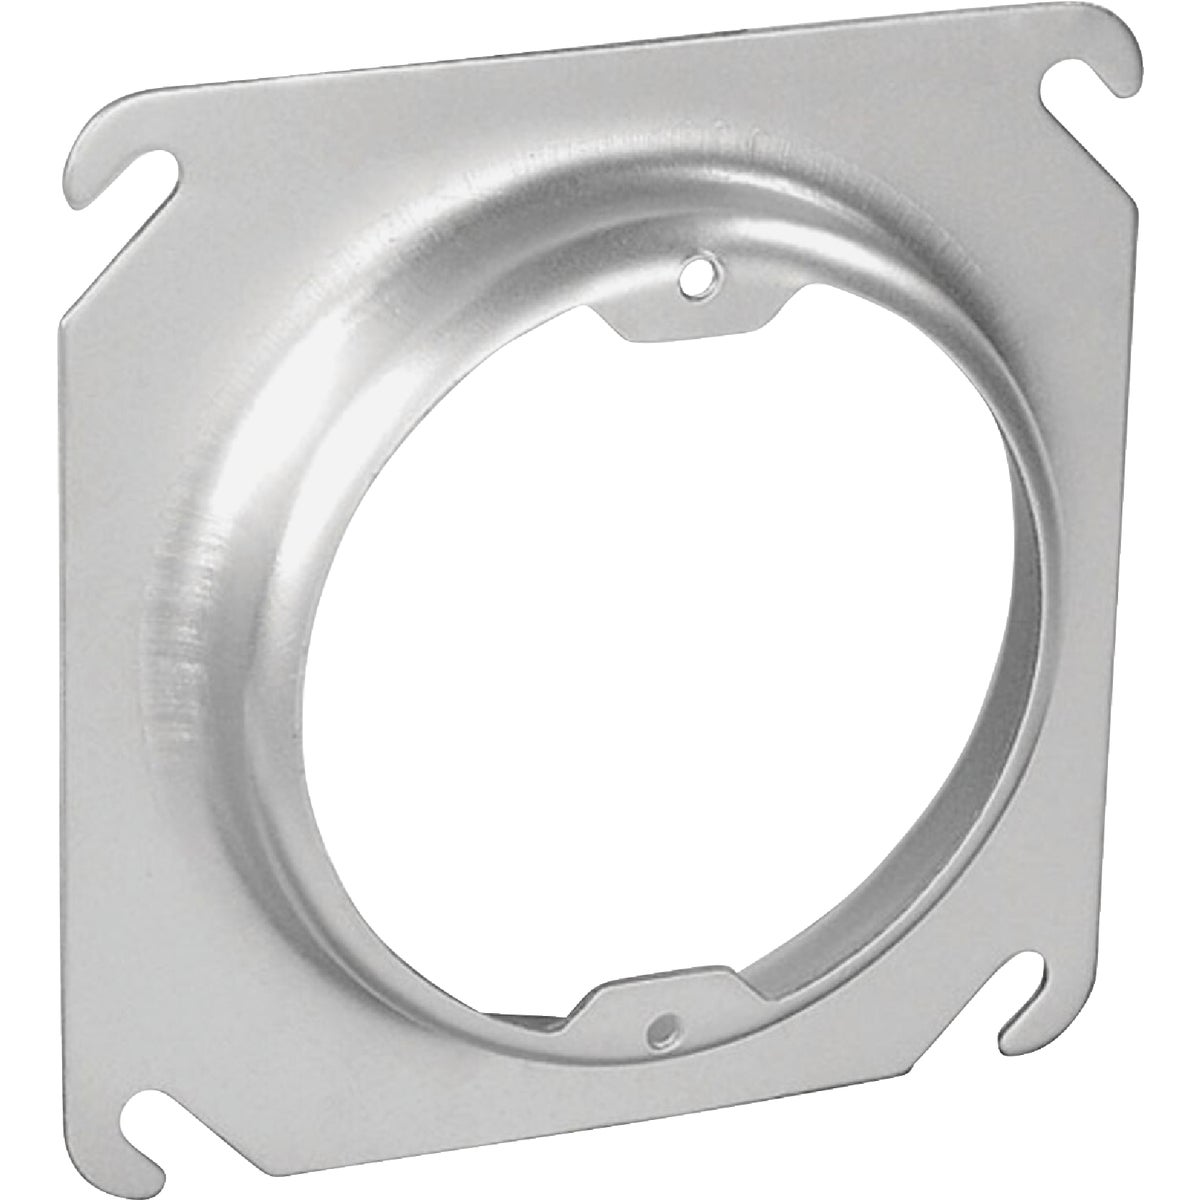 Item 505692, Round fixture ring used to mount light fixtures in walls and ceilings.